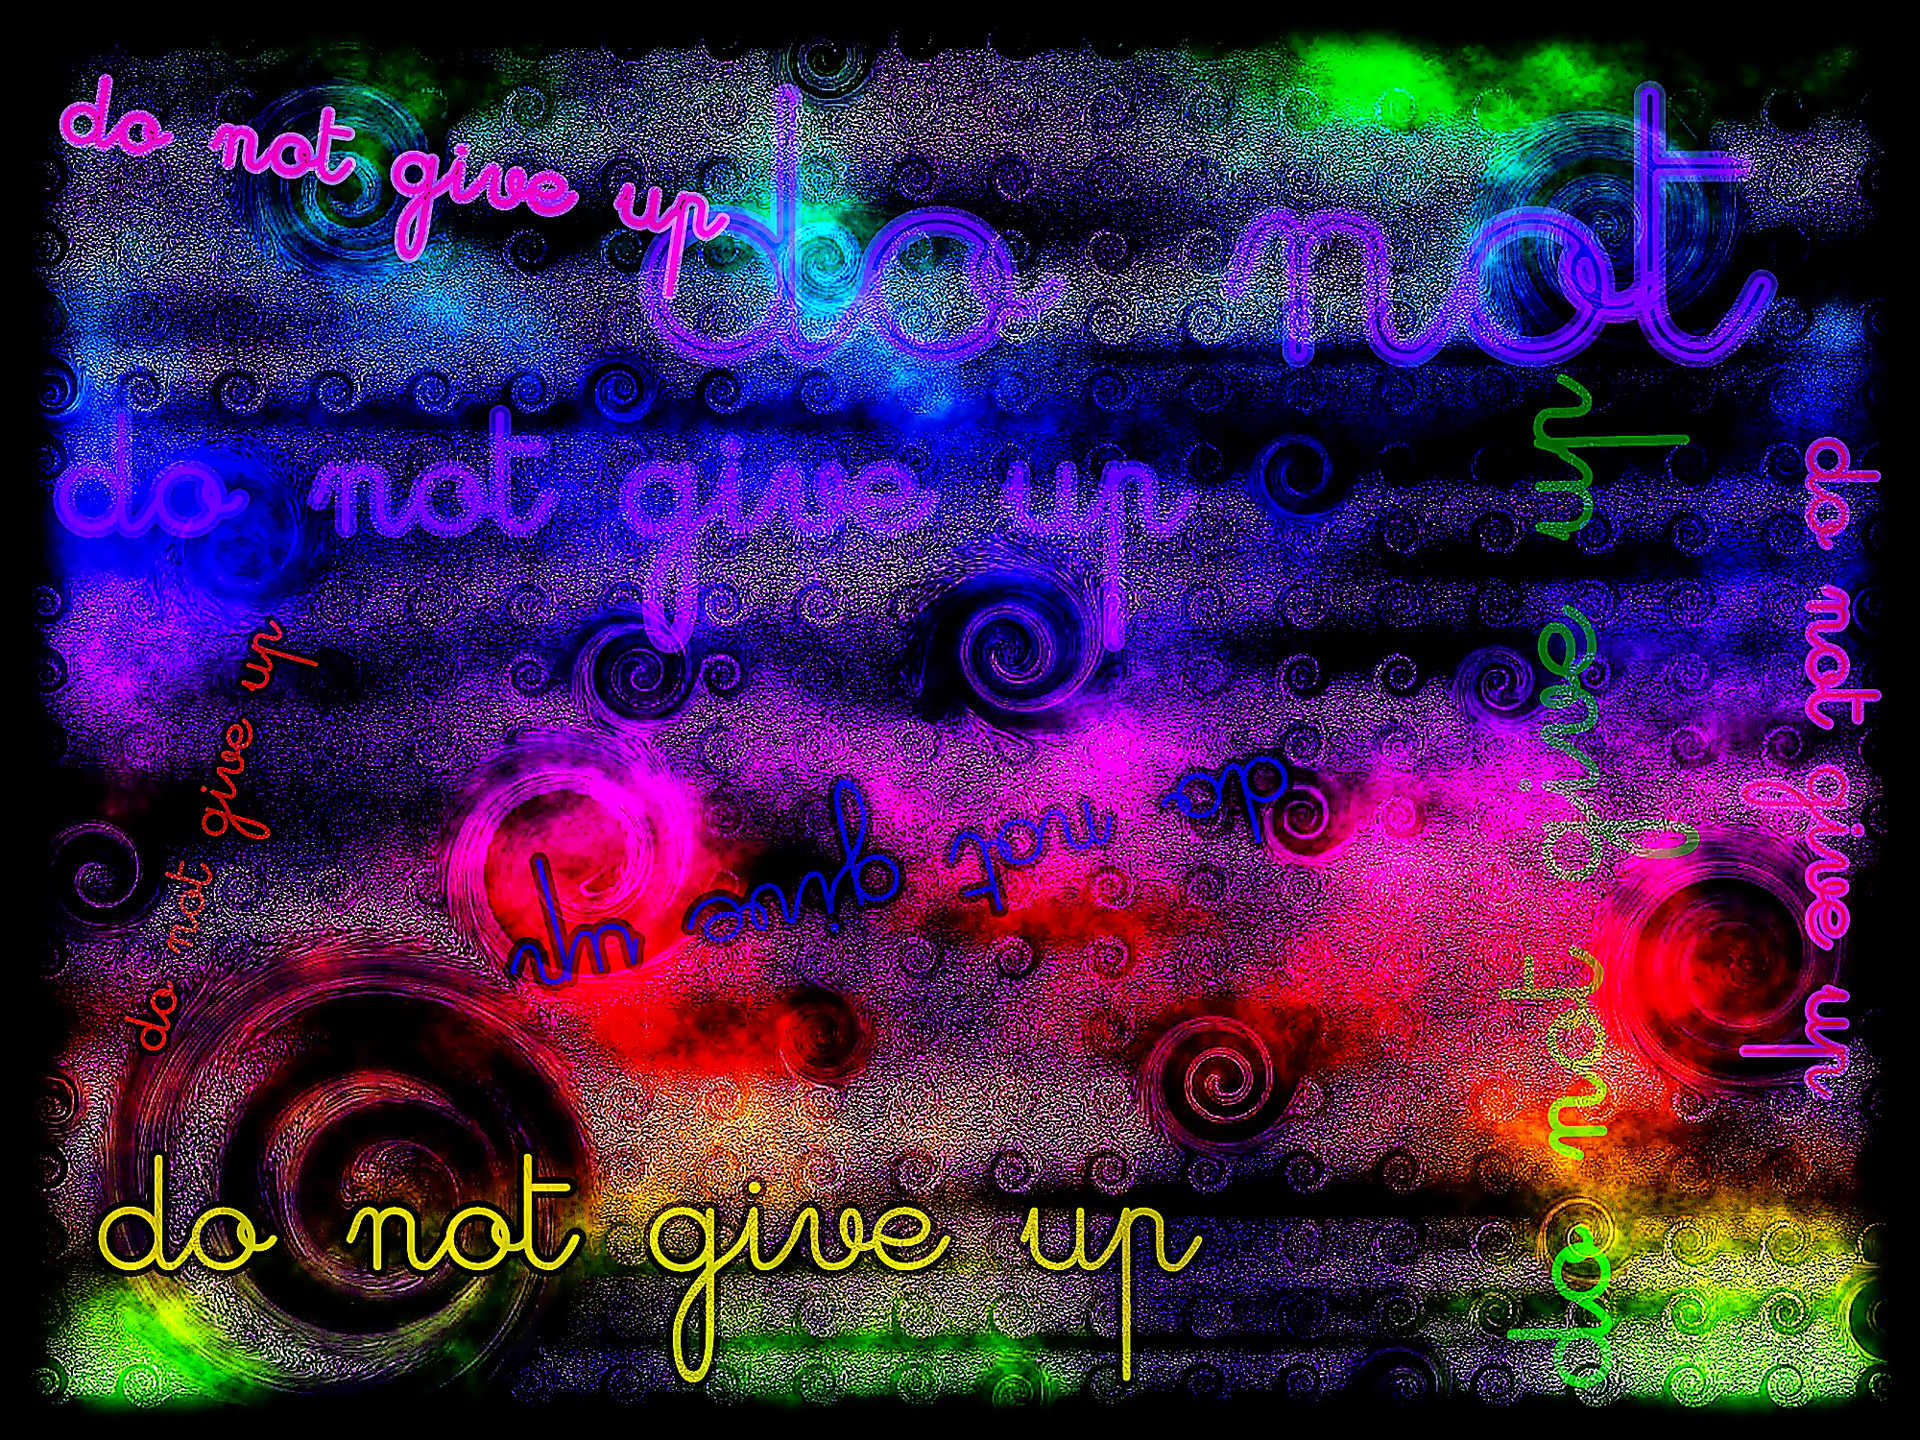 background sauermaul do not give up! free photo